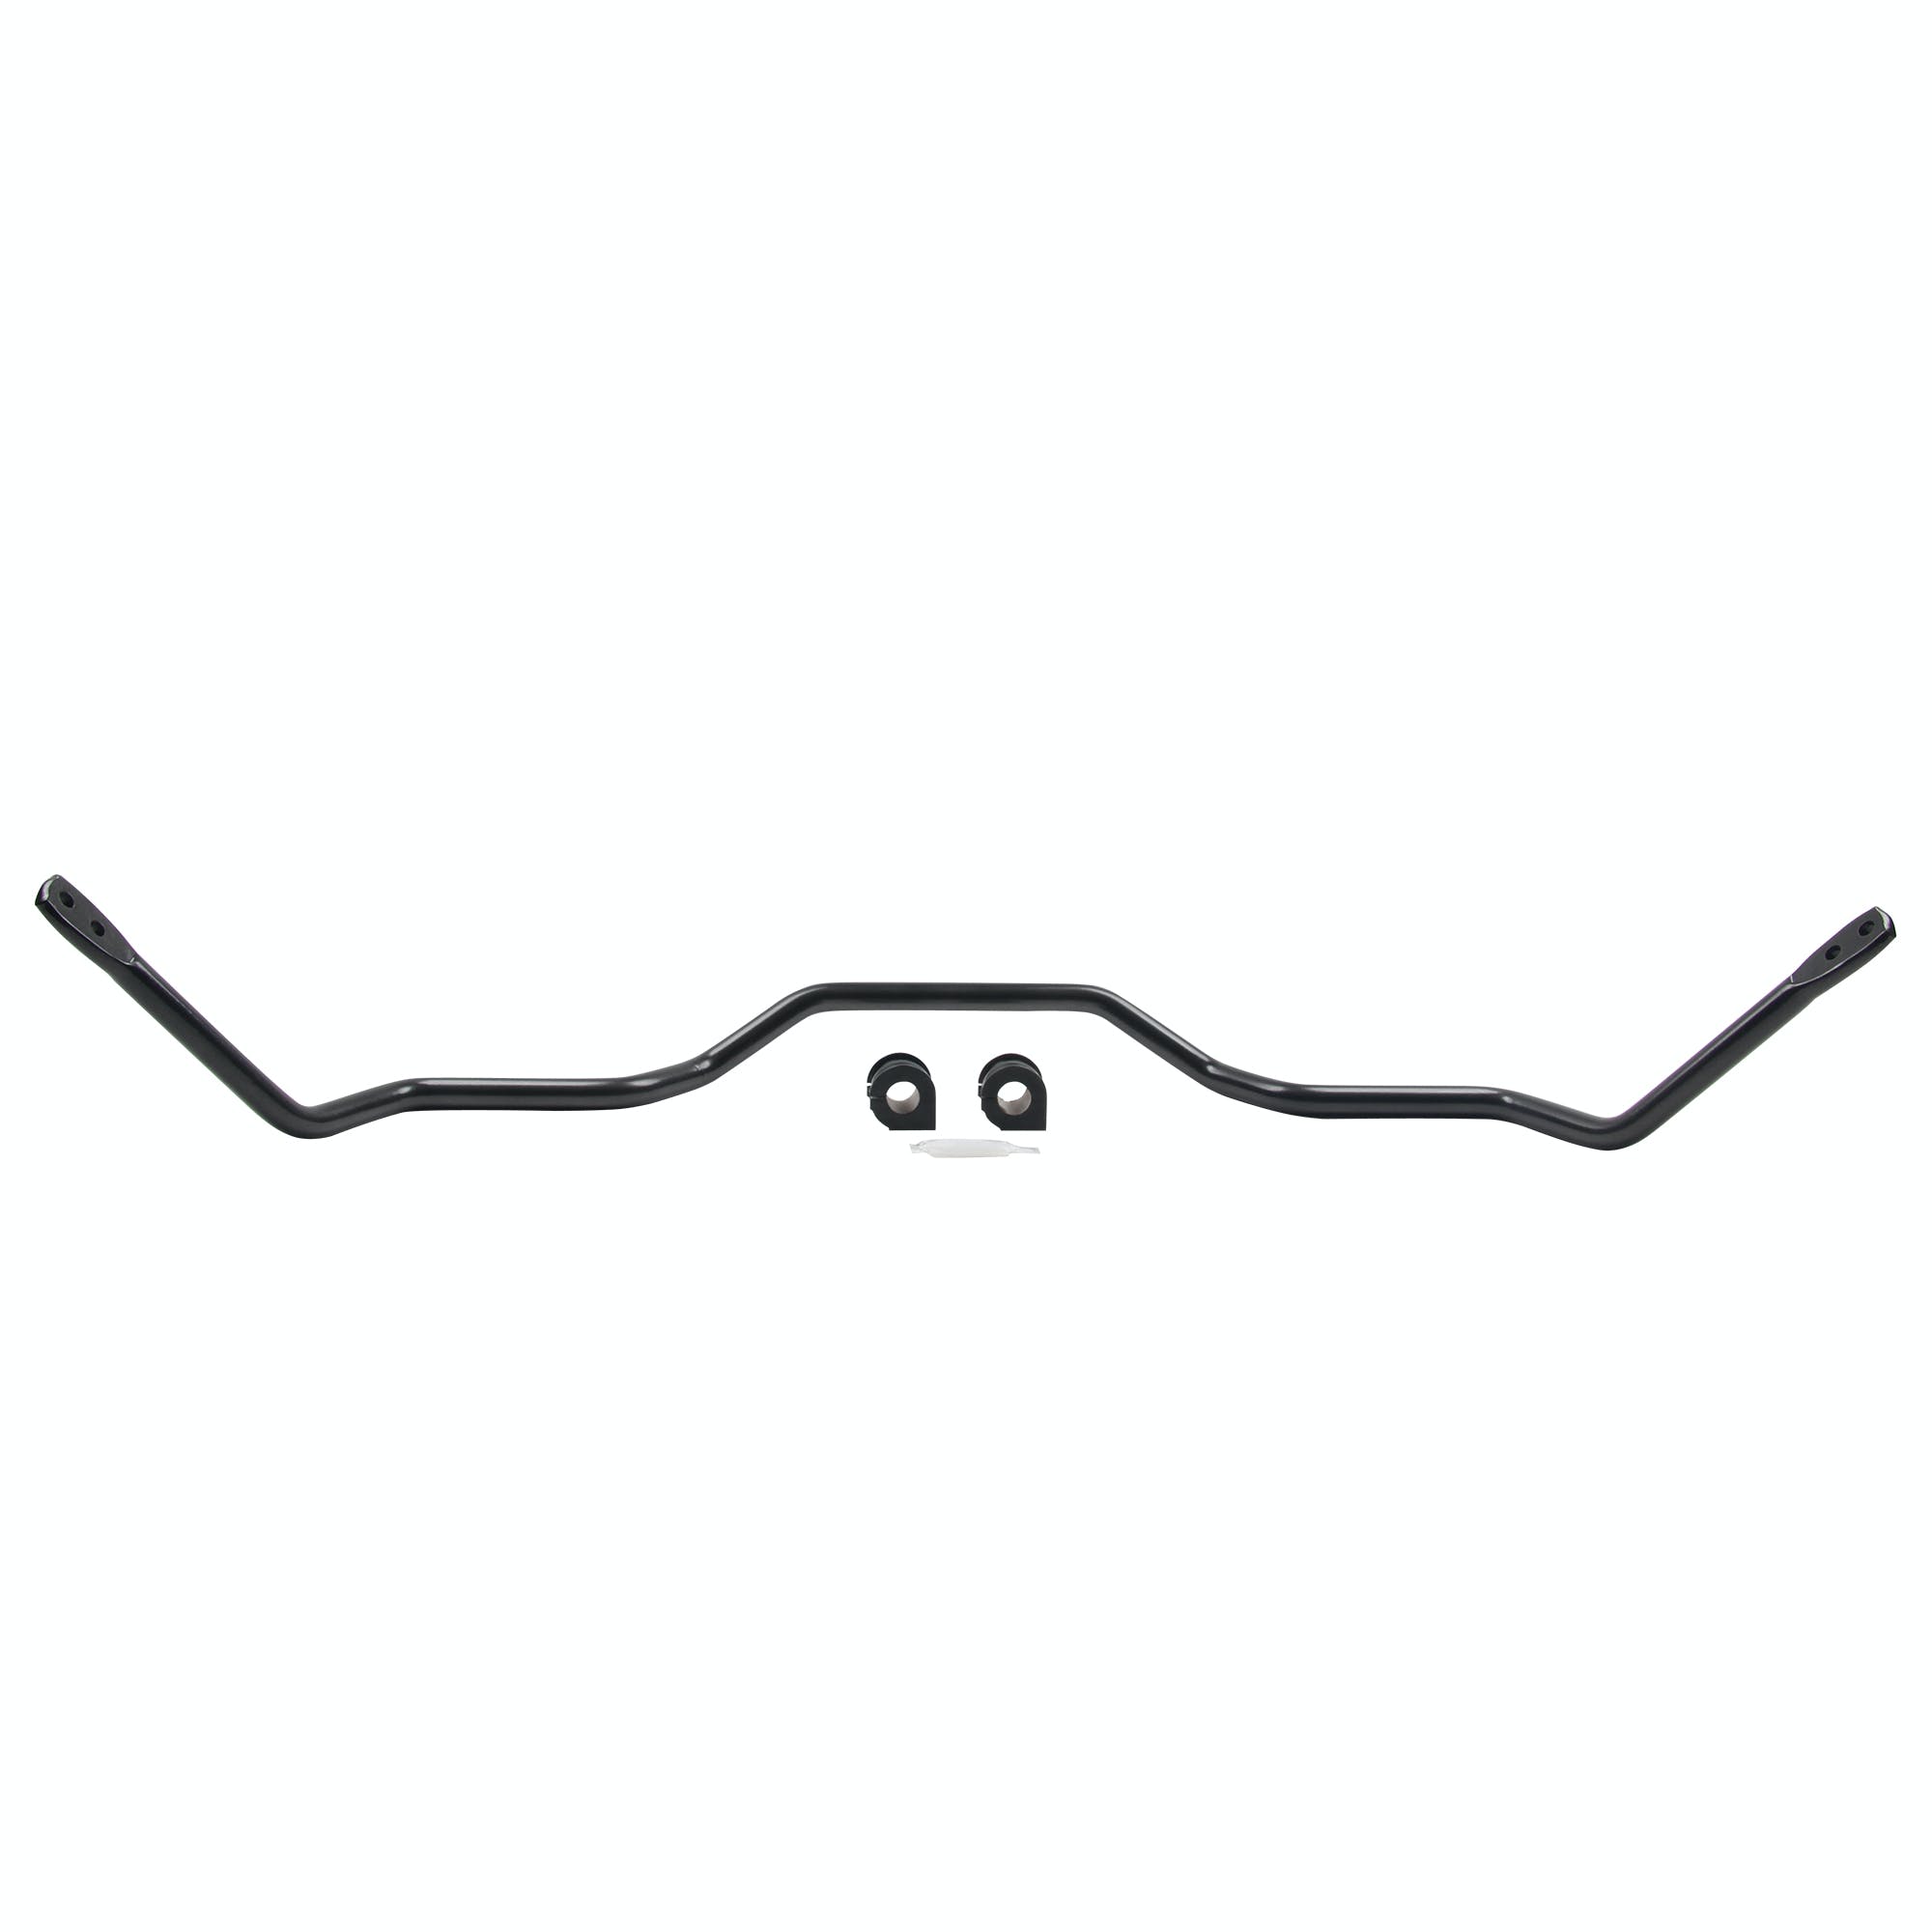 ST Suspensions 50137 Front Anti-Swaybar